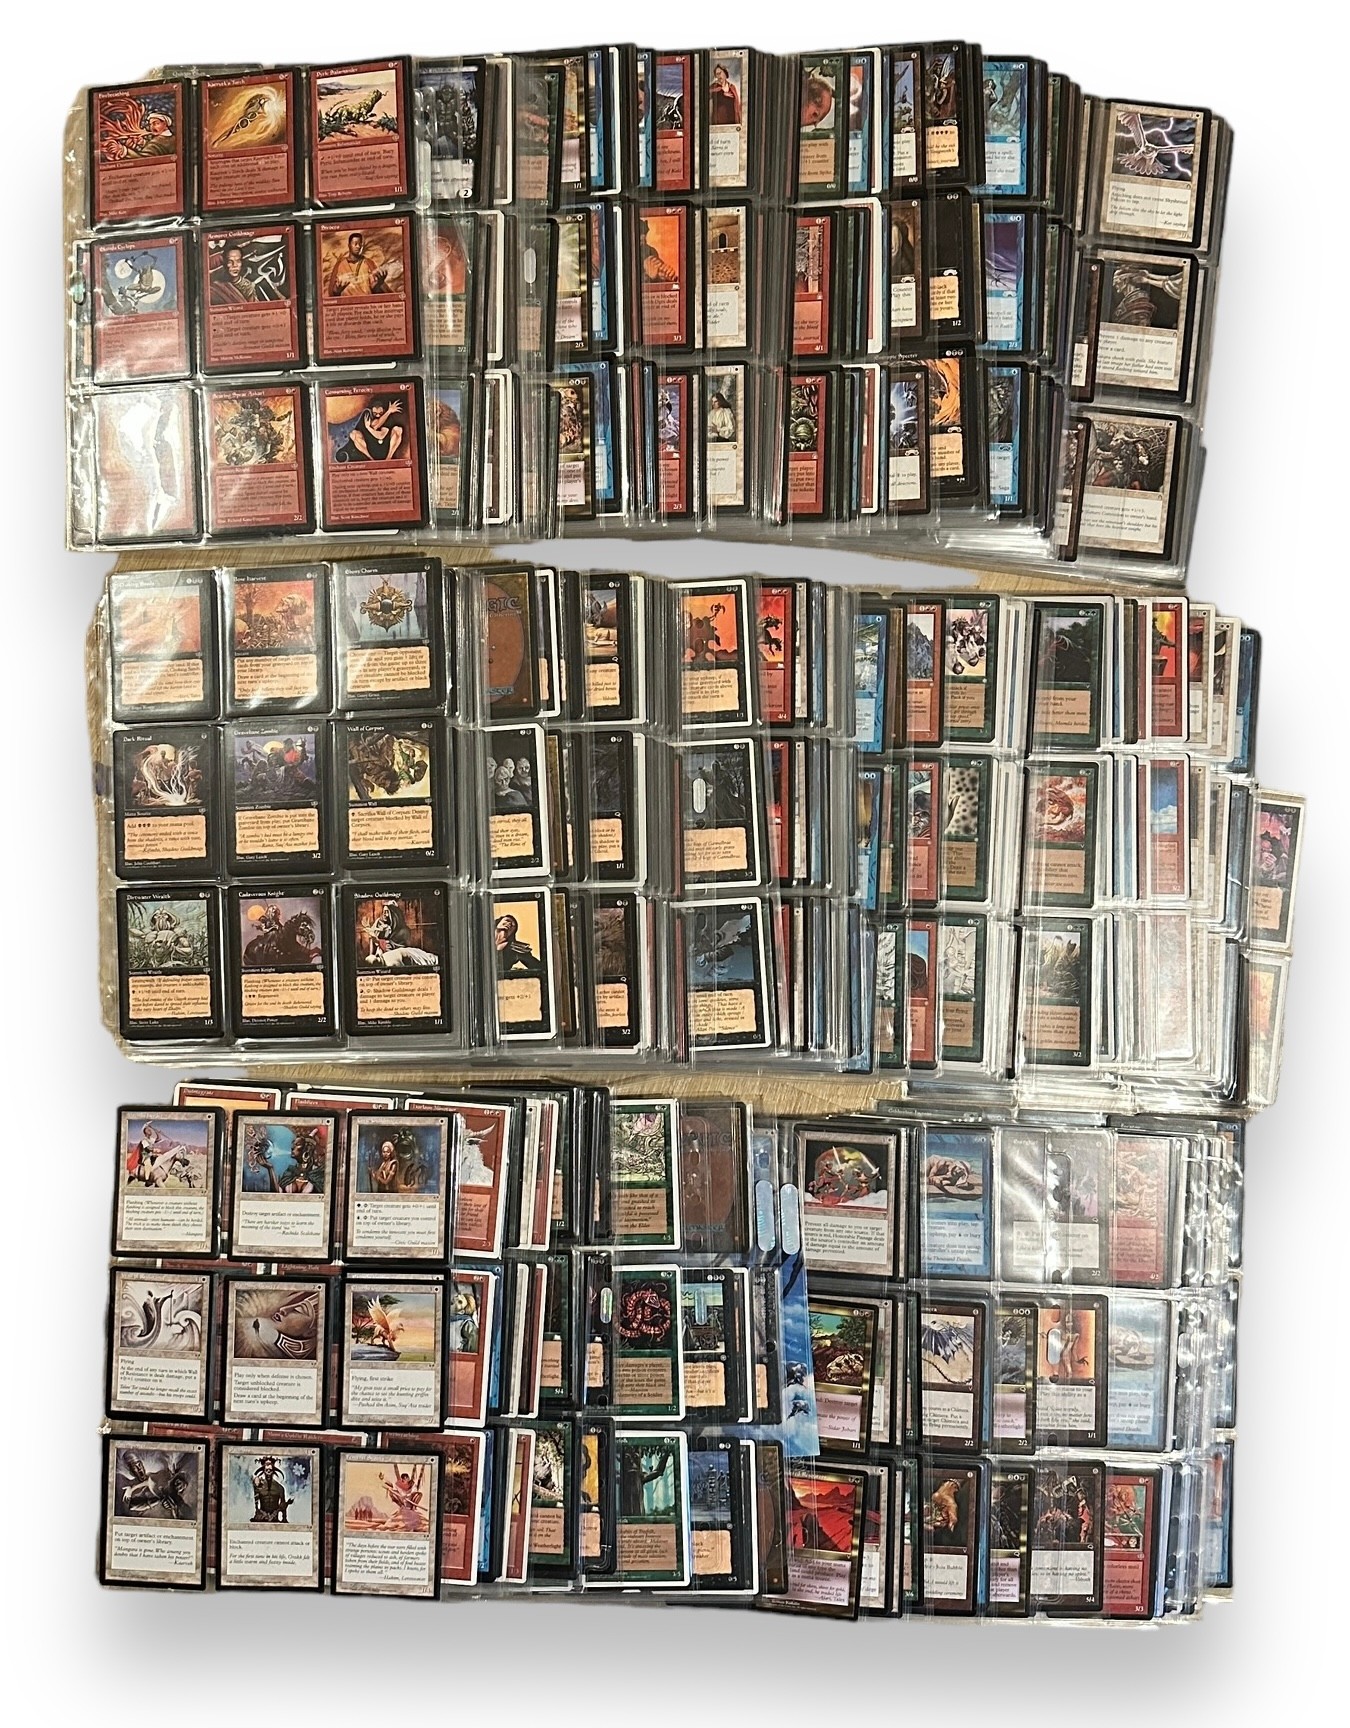 Large Collection of Magic The Gathering Cards from 1990's - 2010's. Rare cards among the collection. - Image 3 of 6